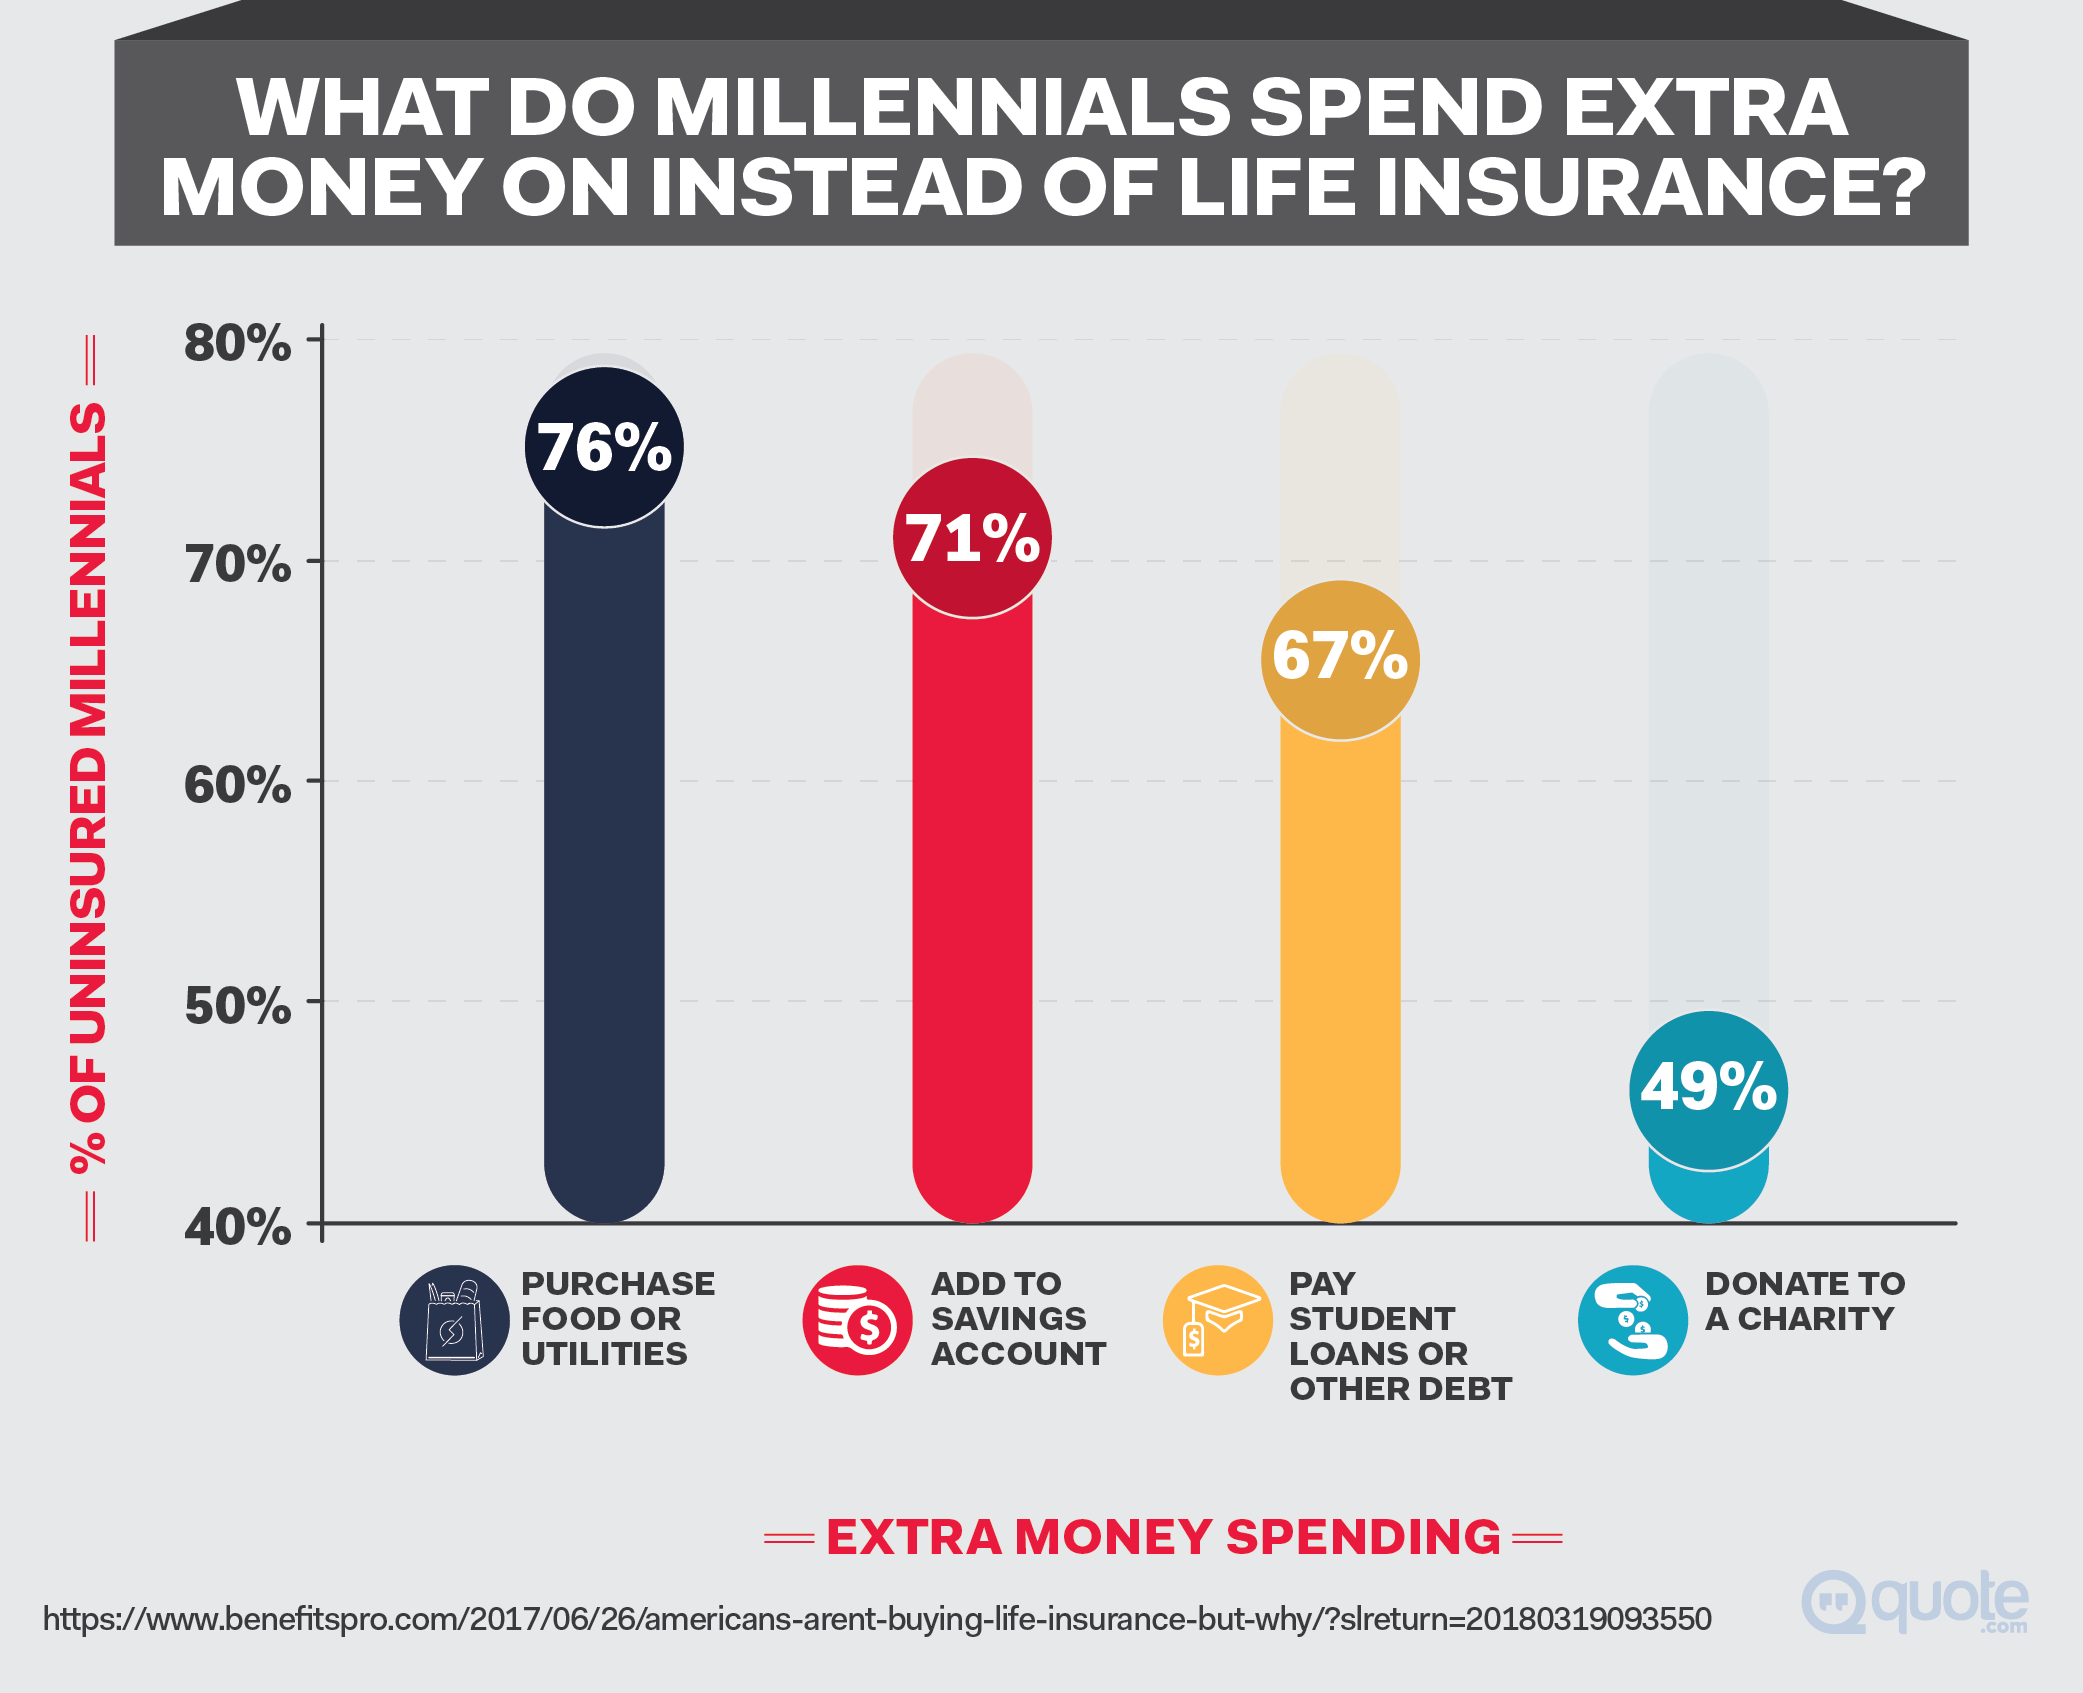 What Do Millennials Spend on Instead of Life Insurance?